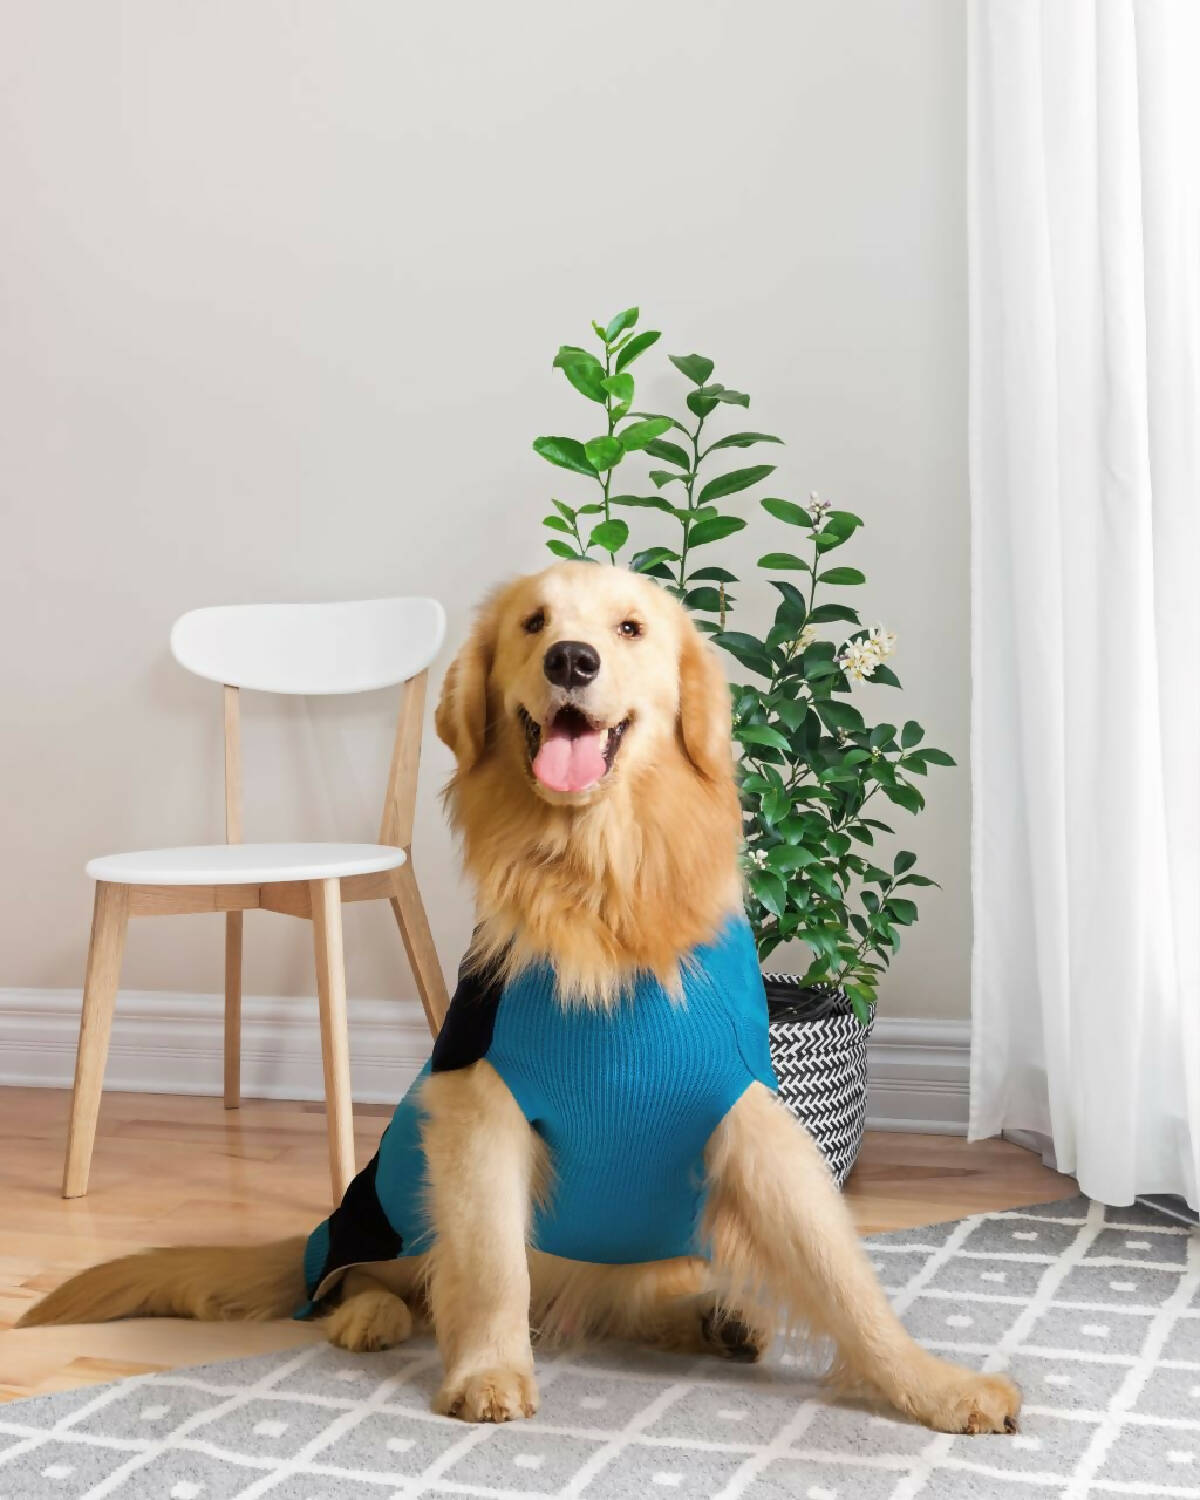 Petsnugs - Half Cable Half Jacquard Sweater for dogs and cats